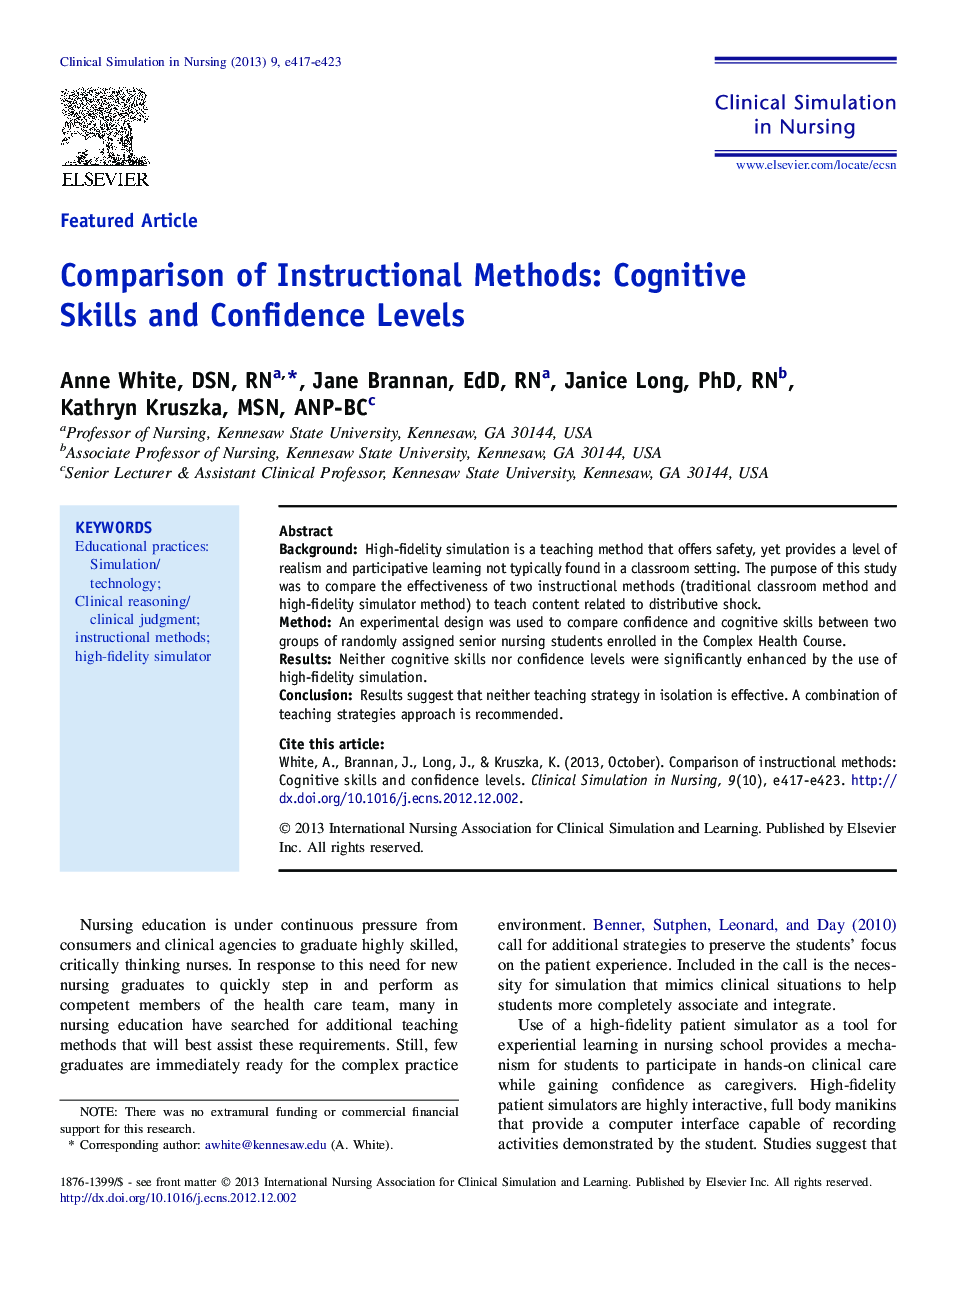 Comparison of Instructional Methods: Cognitive Skills and Confidence Levels 